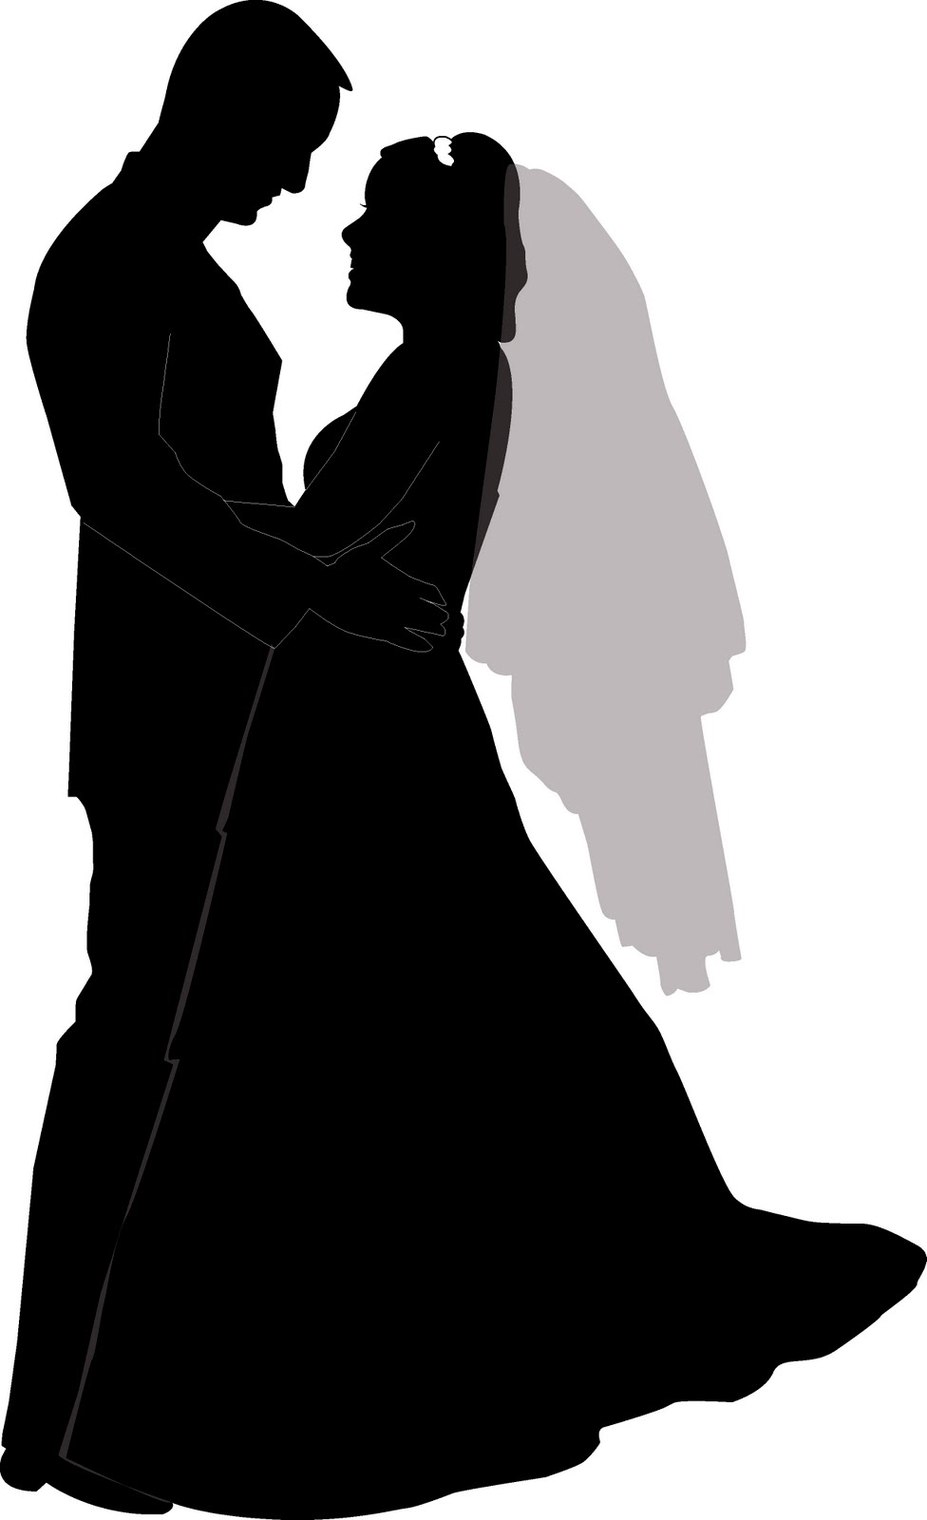 Two people kissing clipart